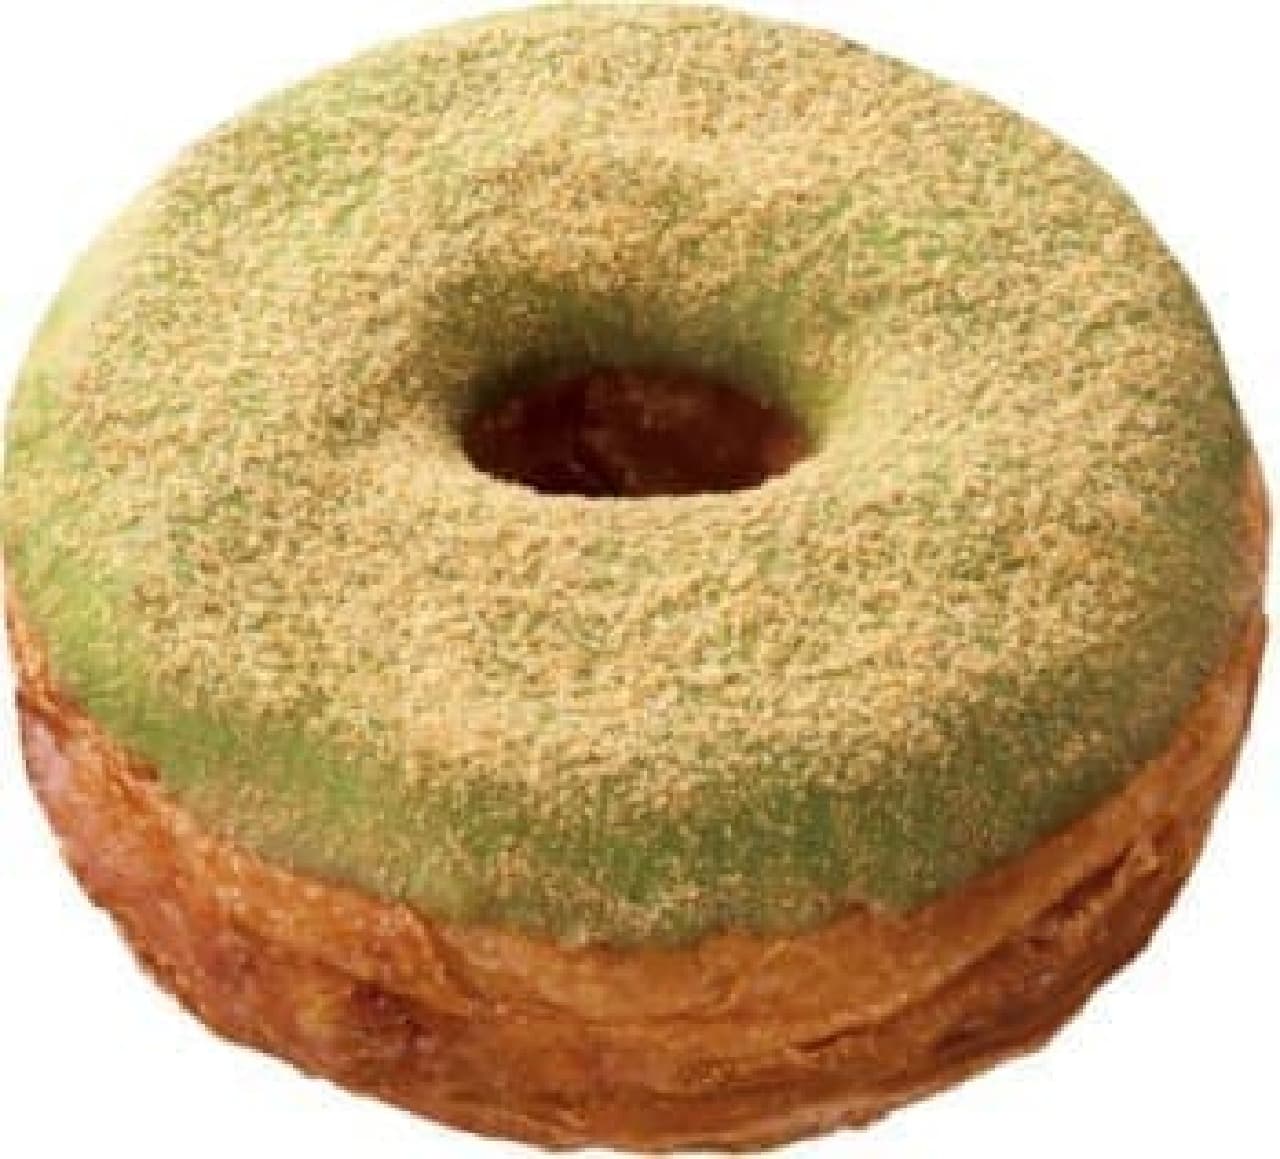 Crispy croissant donuts also have matcha flavor